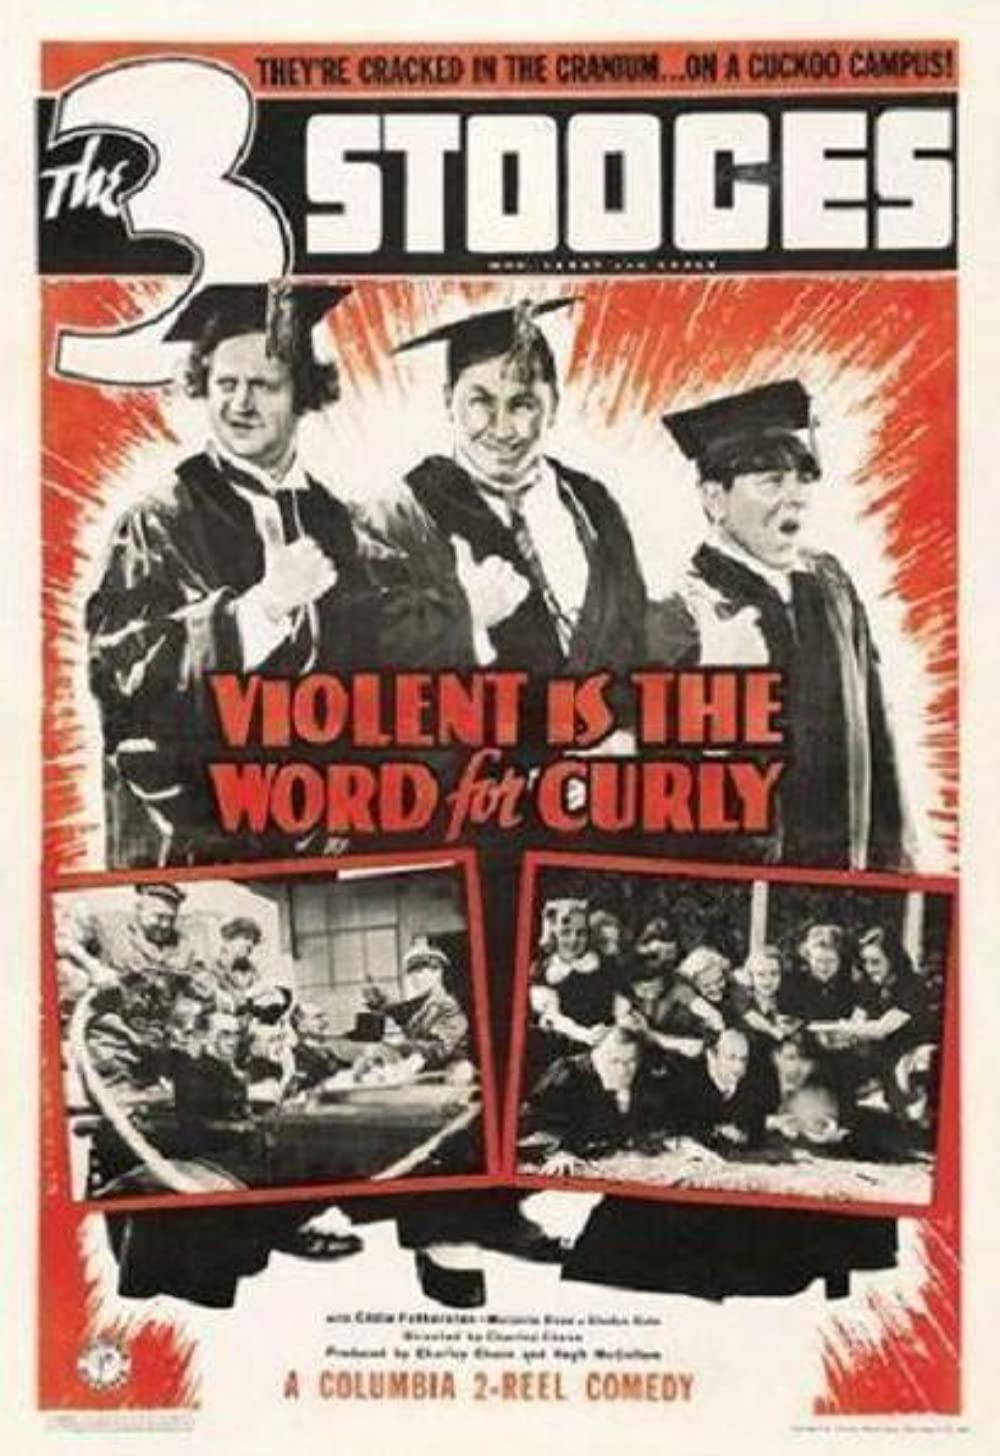 Violent Is the Word for Curly (Short 1938)